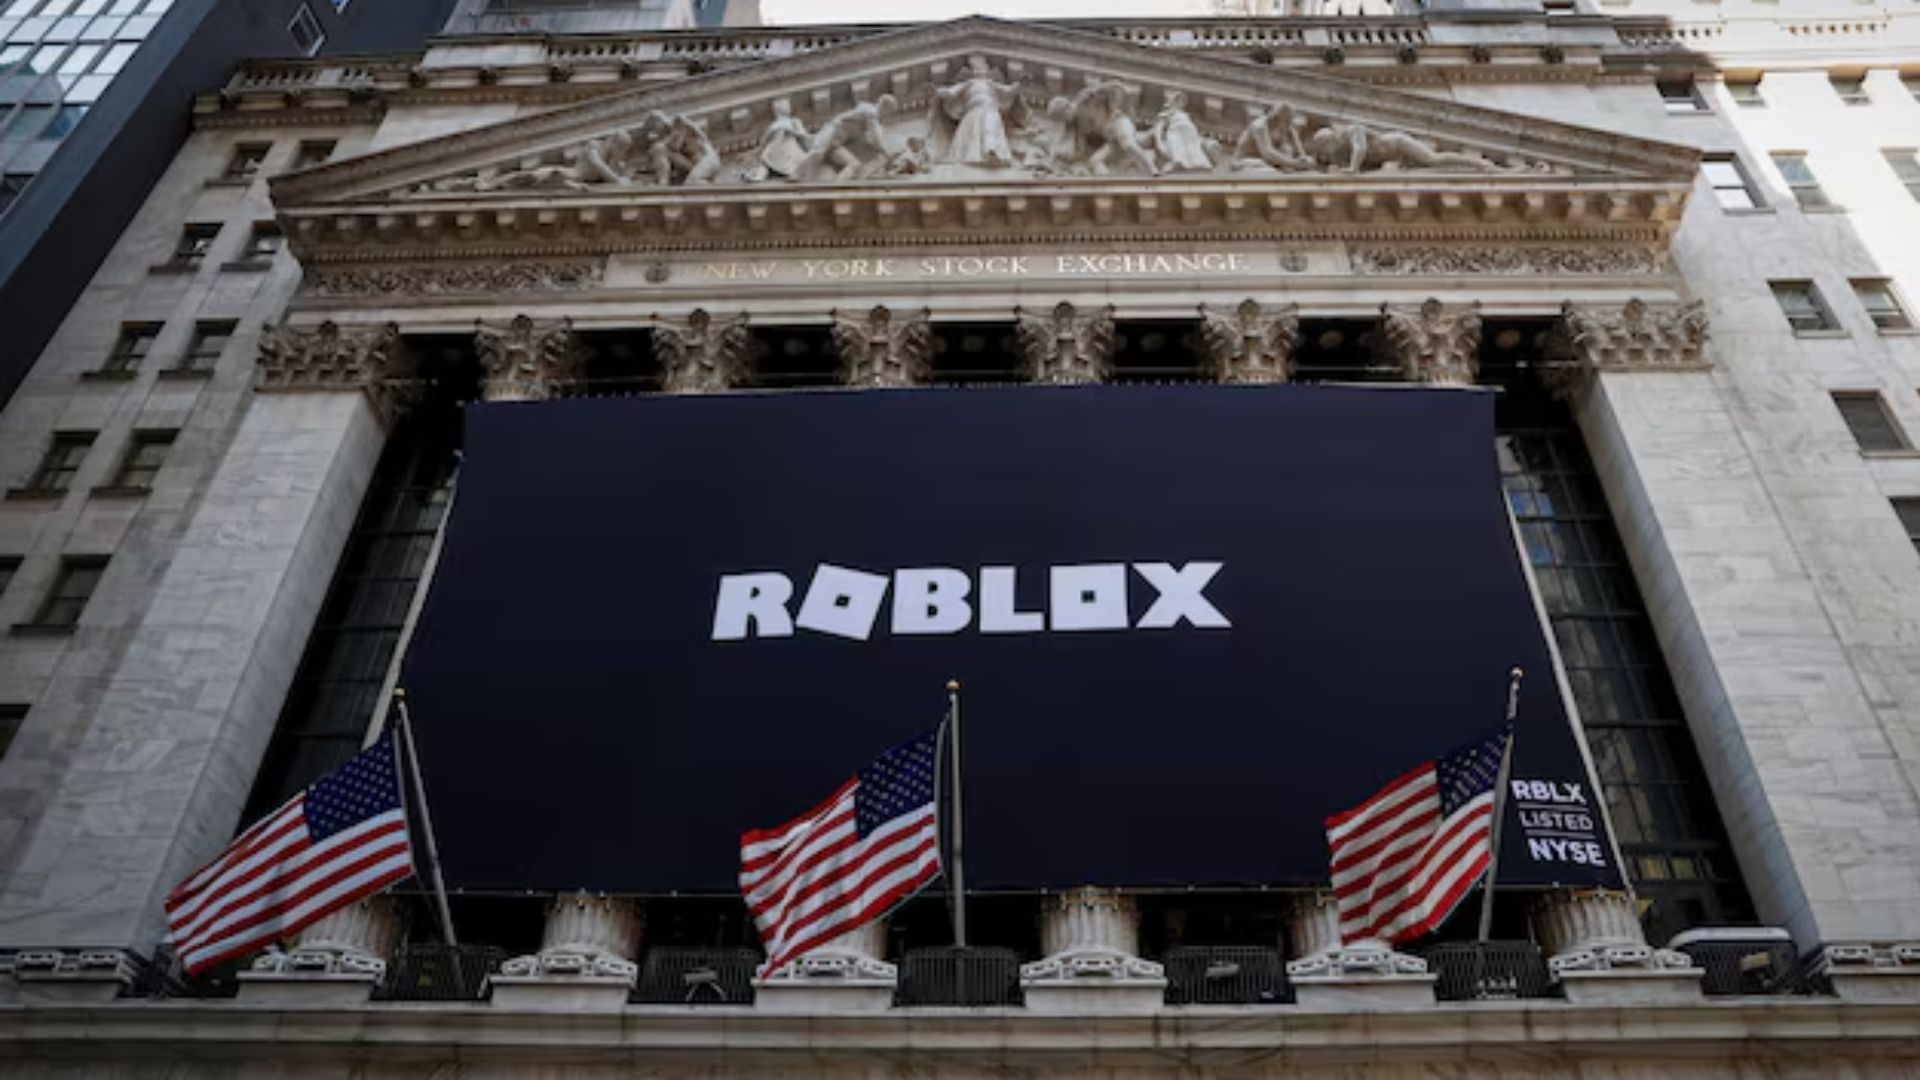 Roblox players to start seeing video ads in its virtual realms